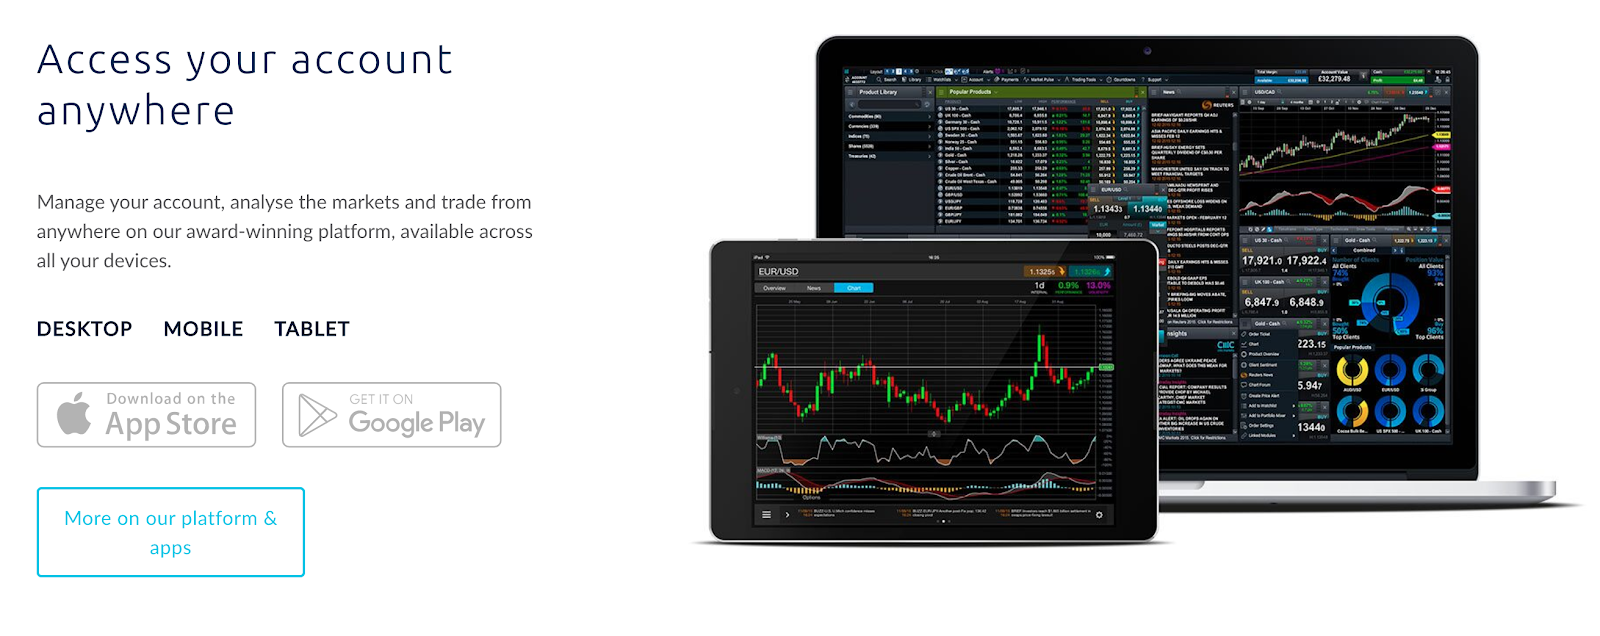 Can you get rich by trading forex: CMC Markets homepage screenshot.